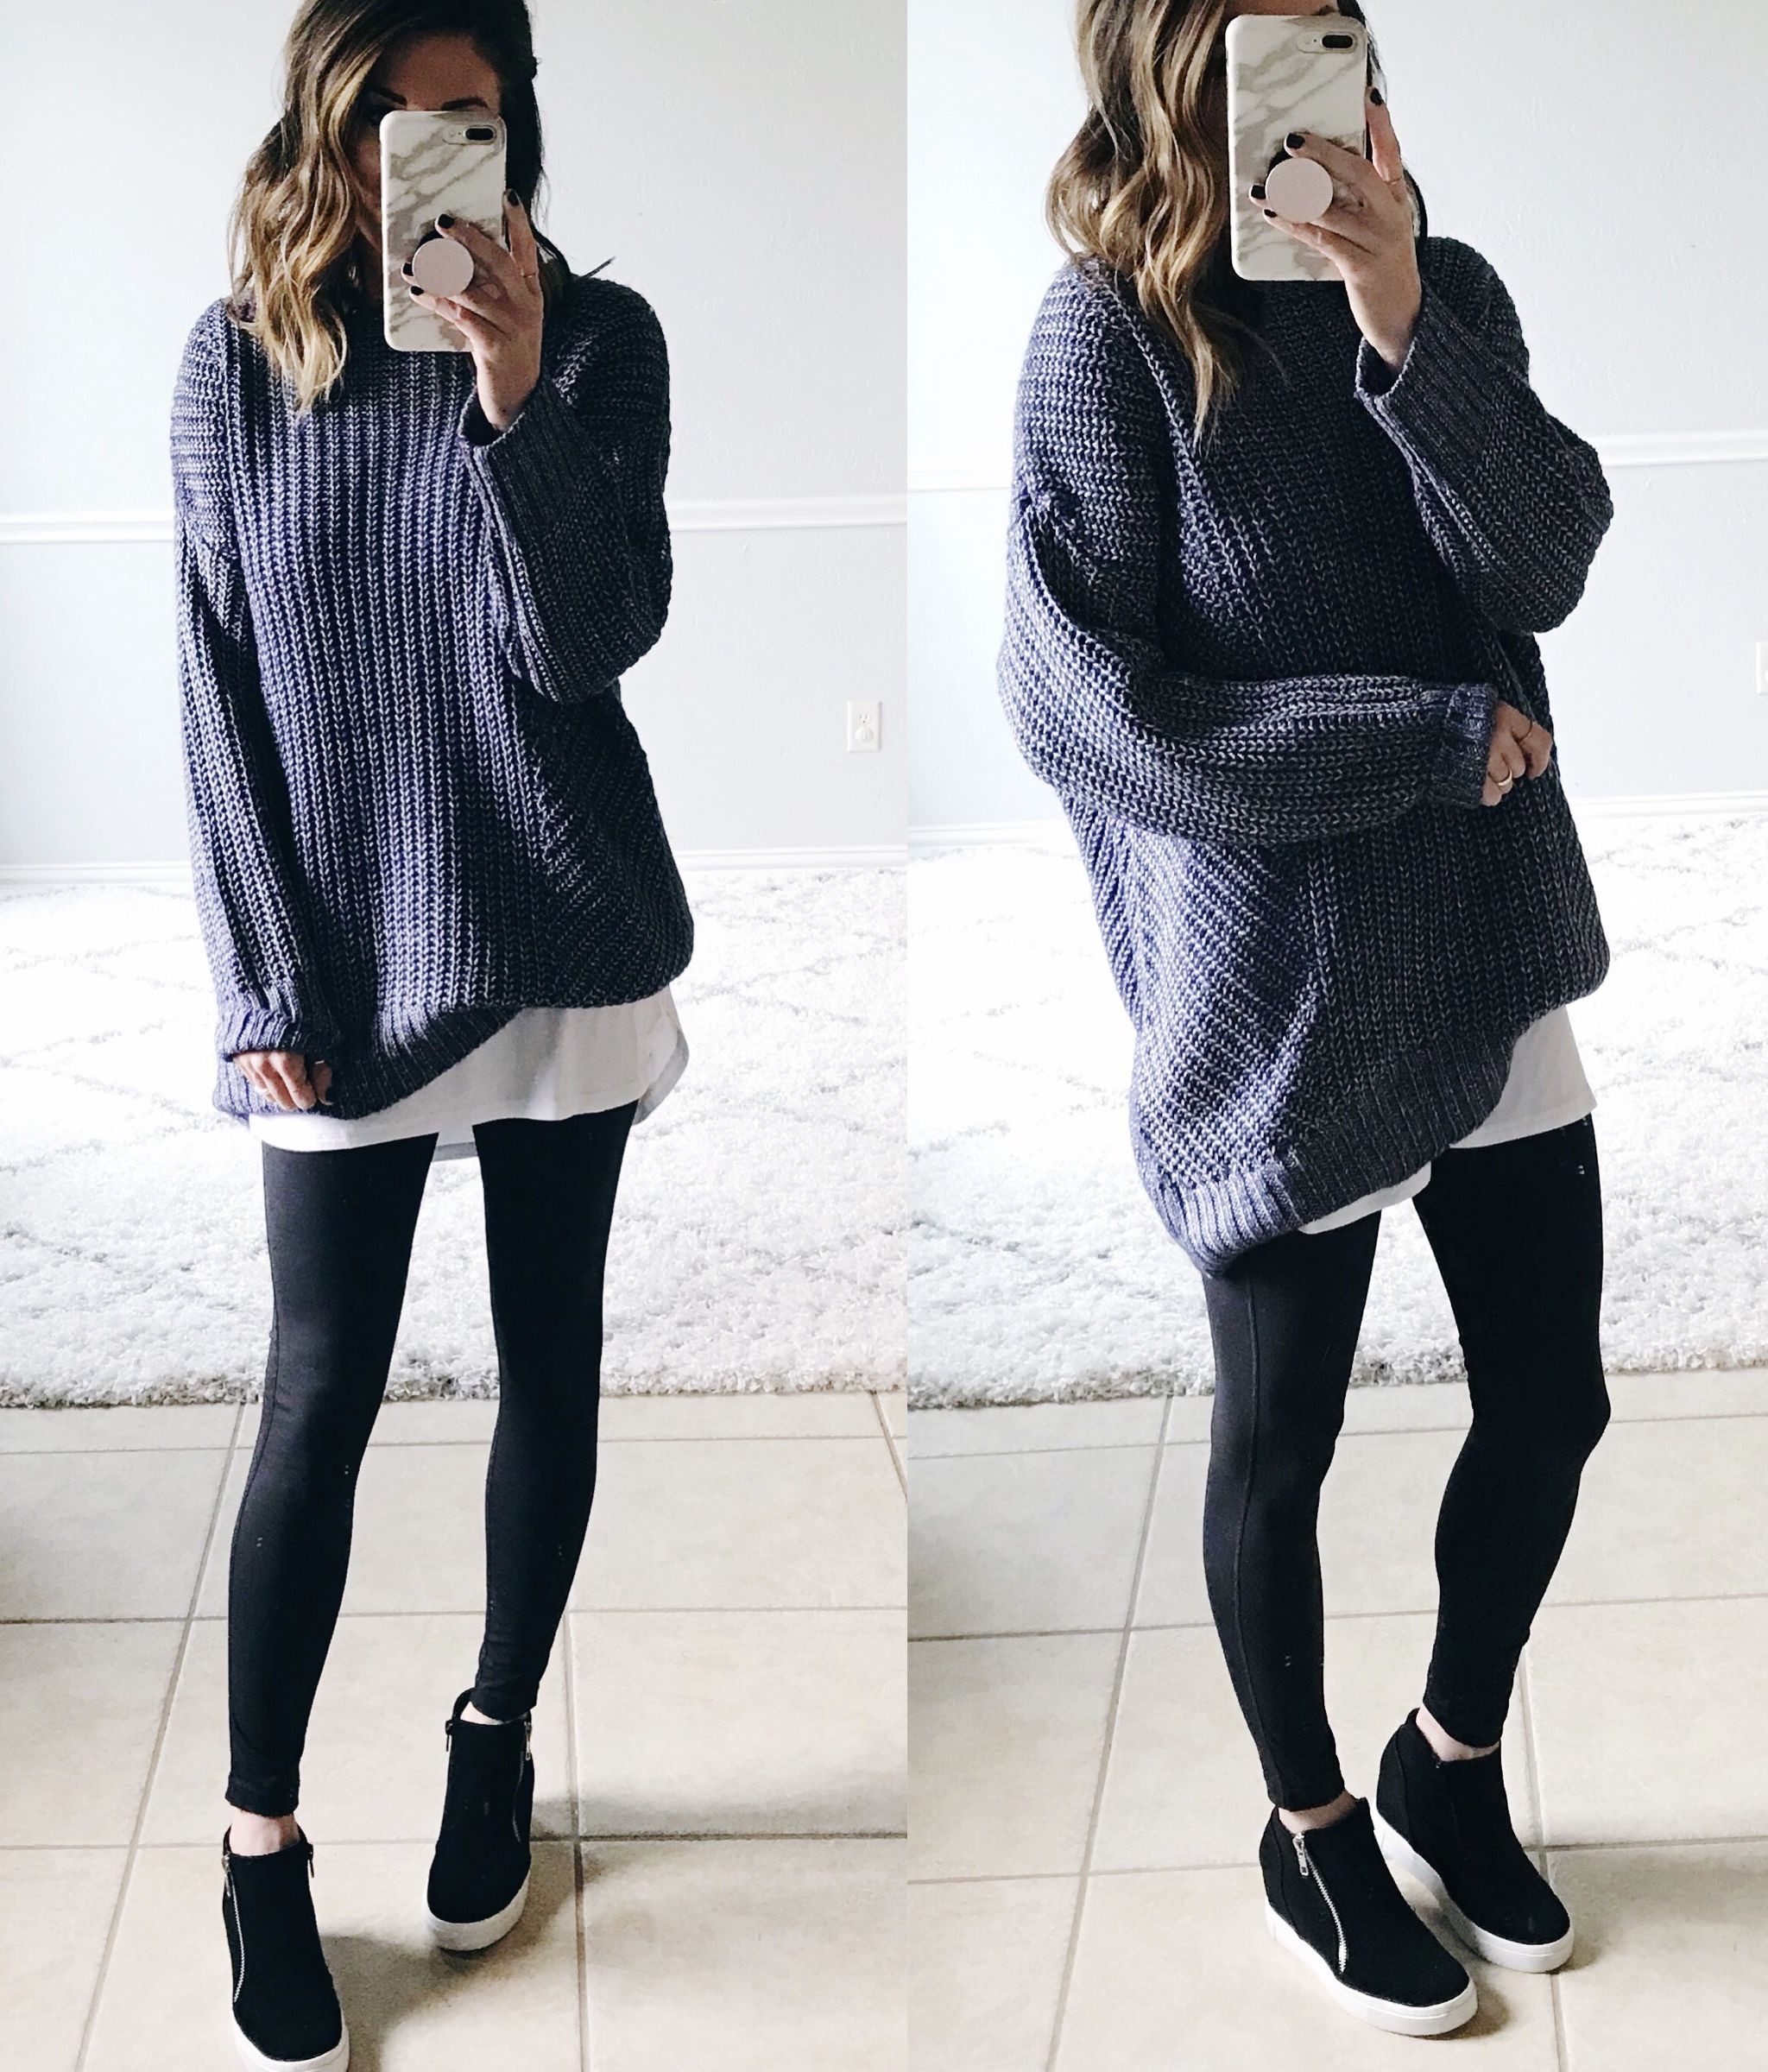 Franco Abultar apodo Sweater And Leggings Outfits Tumblr, FASHION SNEAKERS, Sports shoes |  Sweater And Leggings Outfits Tumblr | FASHION SNEAKERS, Mock Neck, Online  shopping